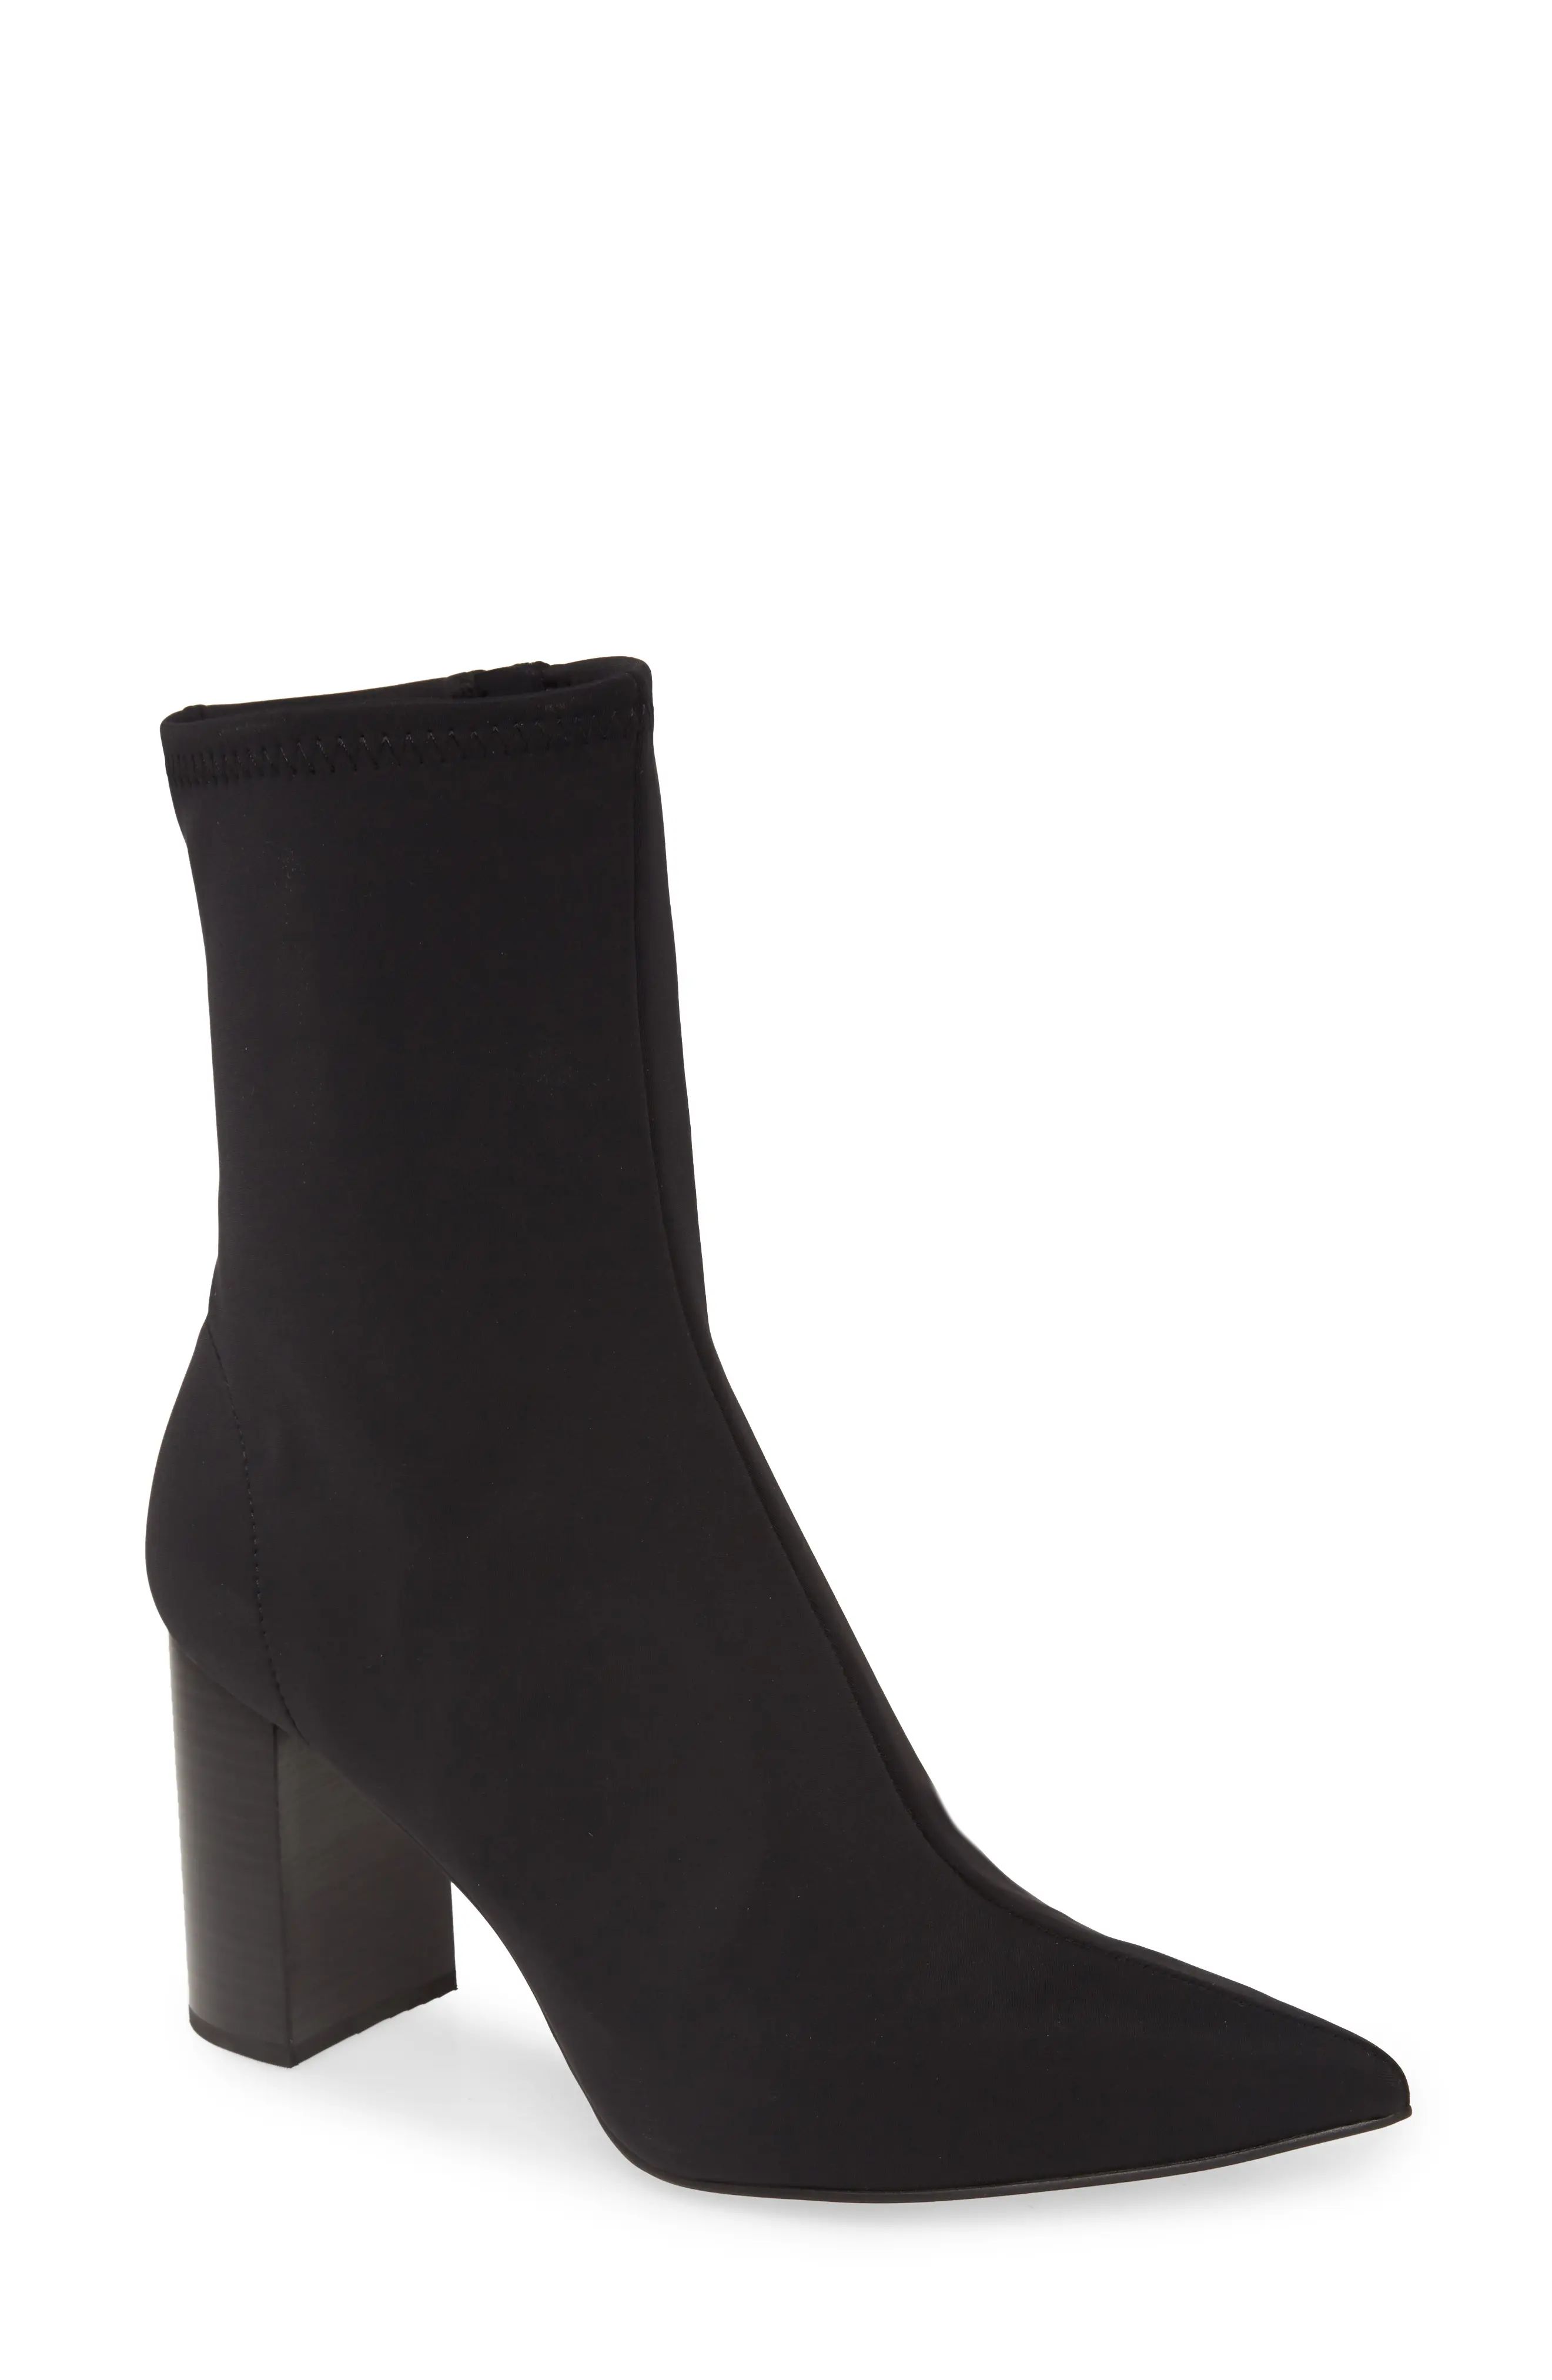 Jeffrey Campbell Siren Pointed Toe Bootie in Black Neoprene Combo at Nordstrom, Size 8.5 | Nordstrom